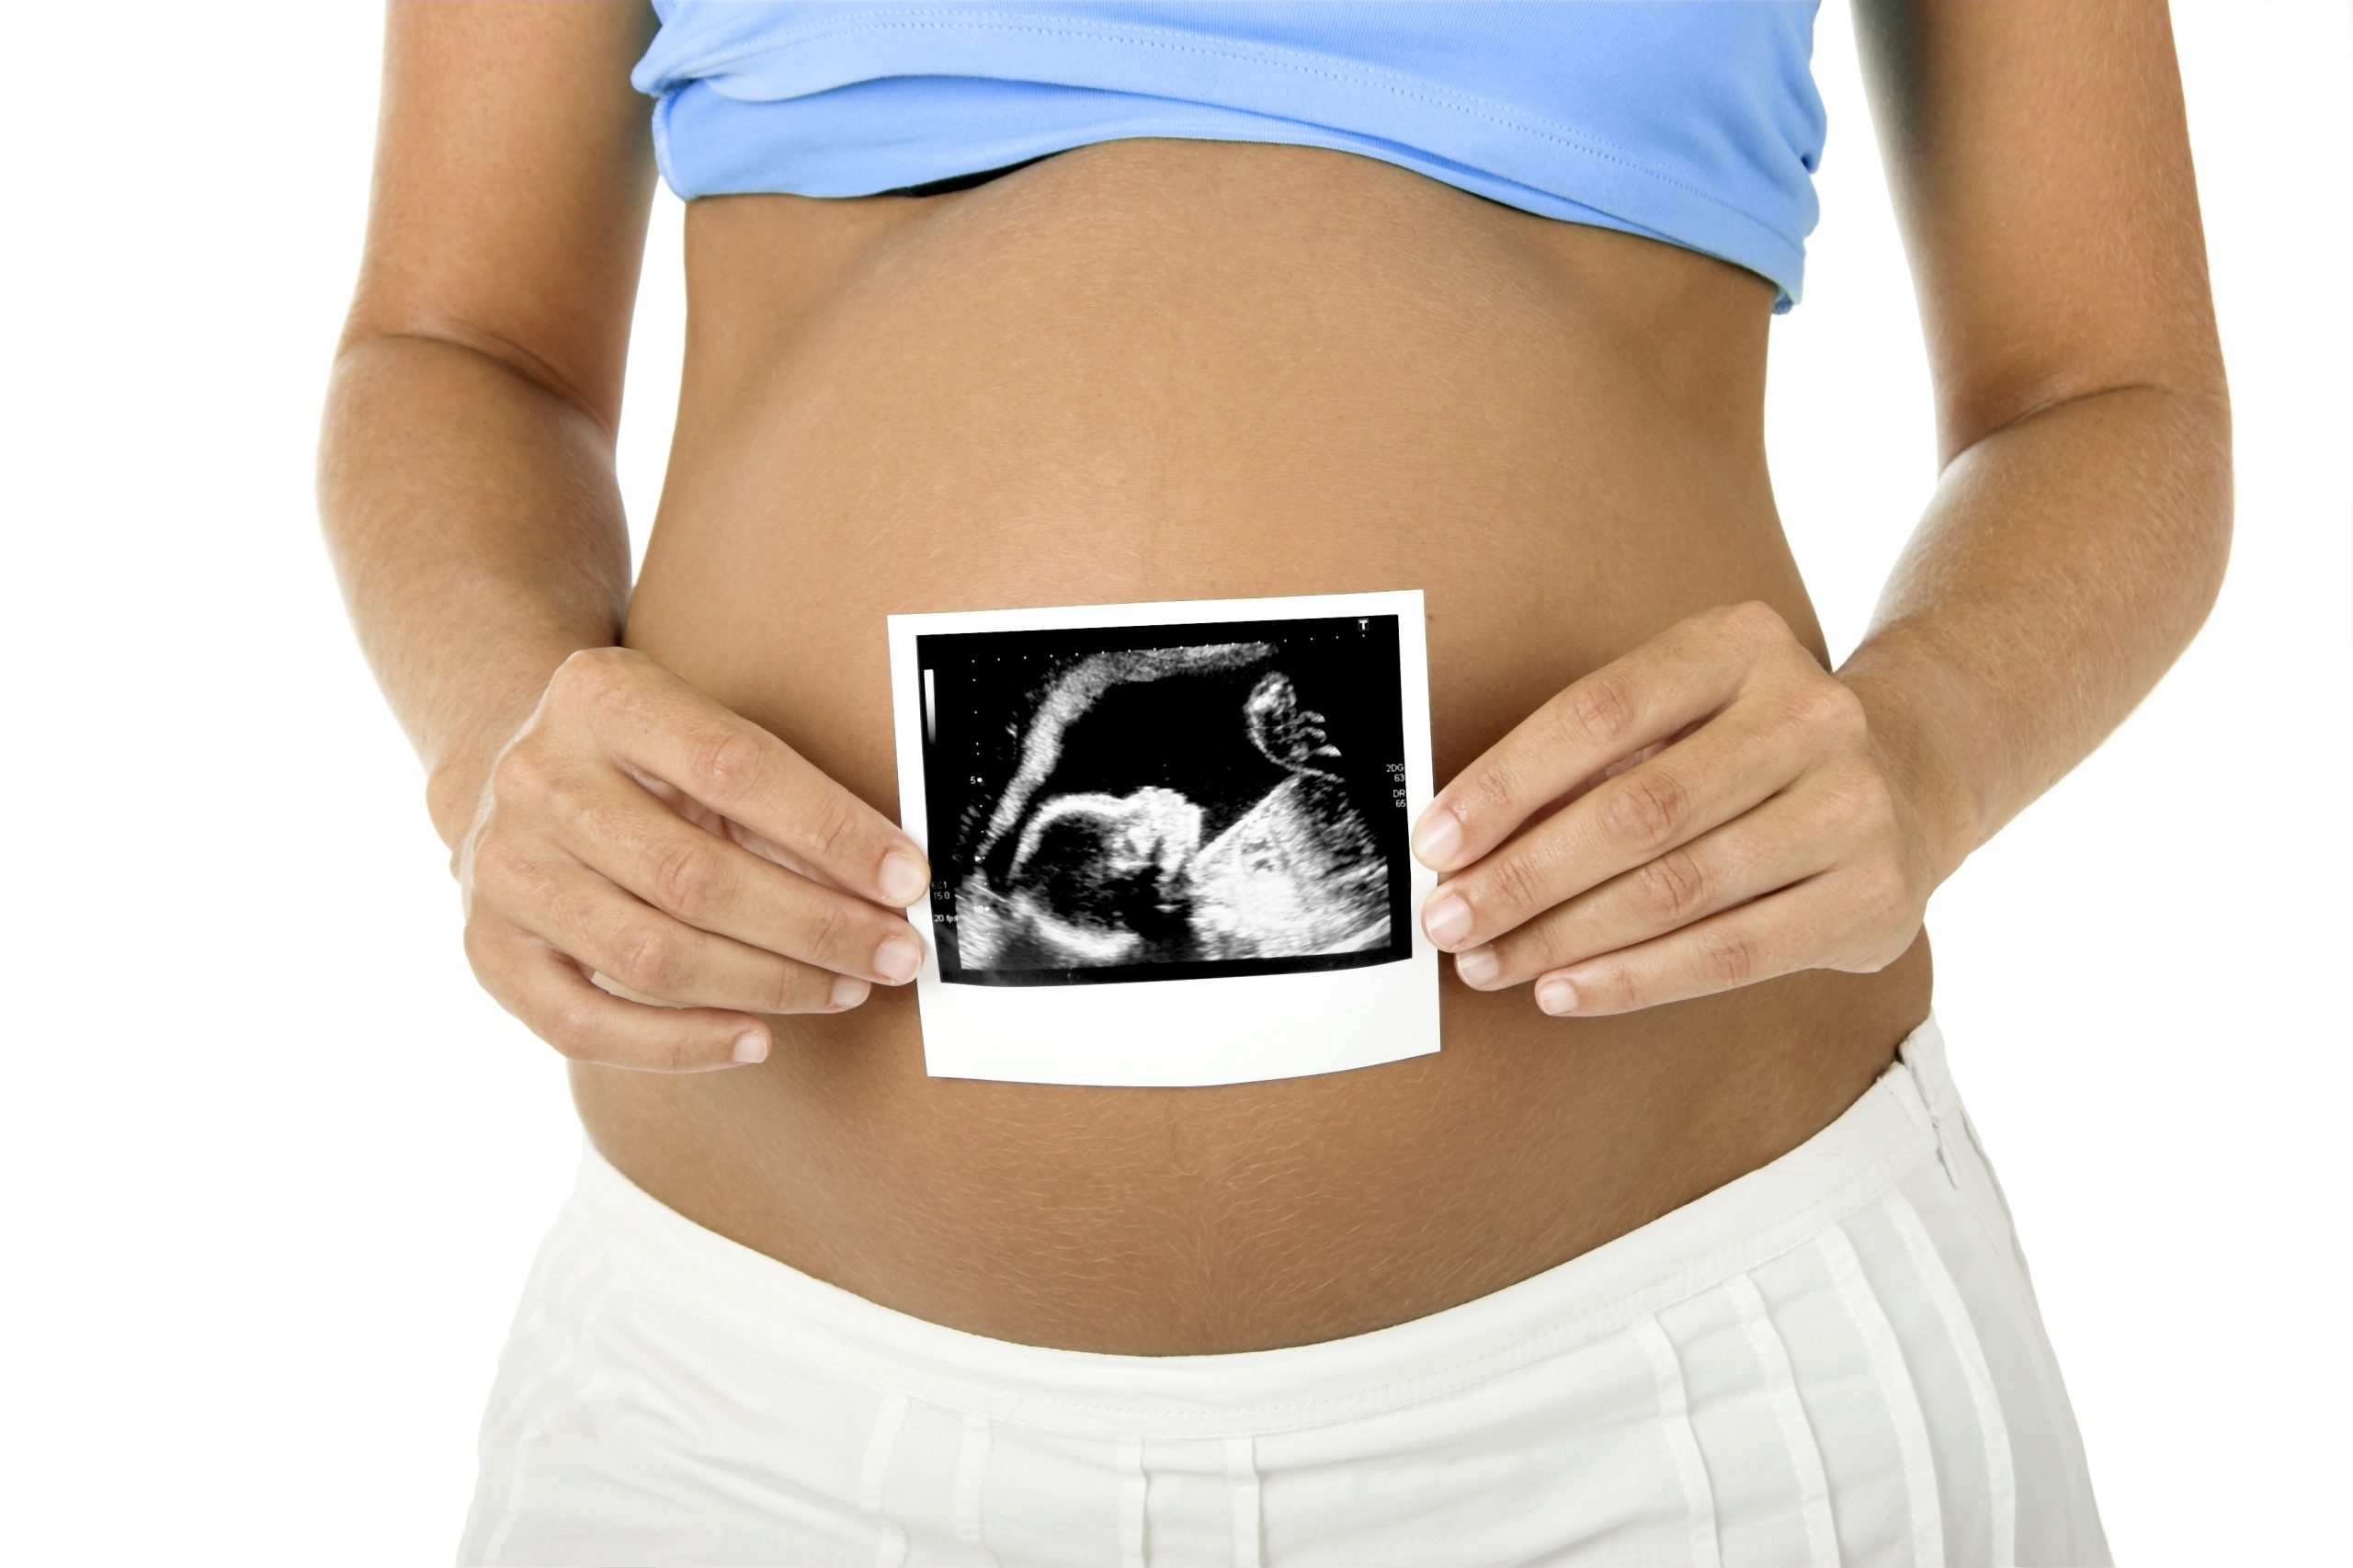 Study Finds Ultrasound In 1st Trimester of Pregnancy Linked To Autism